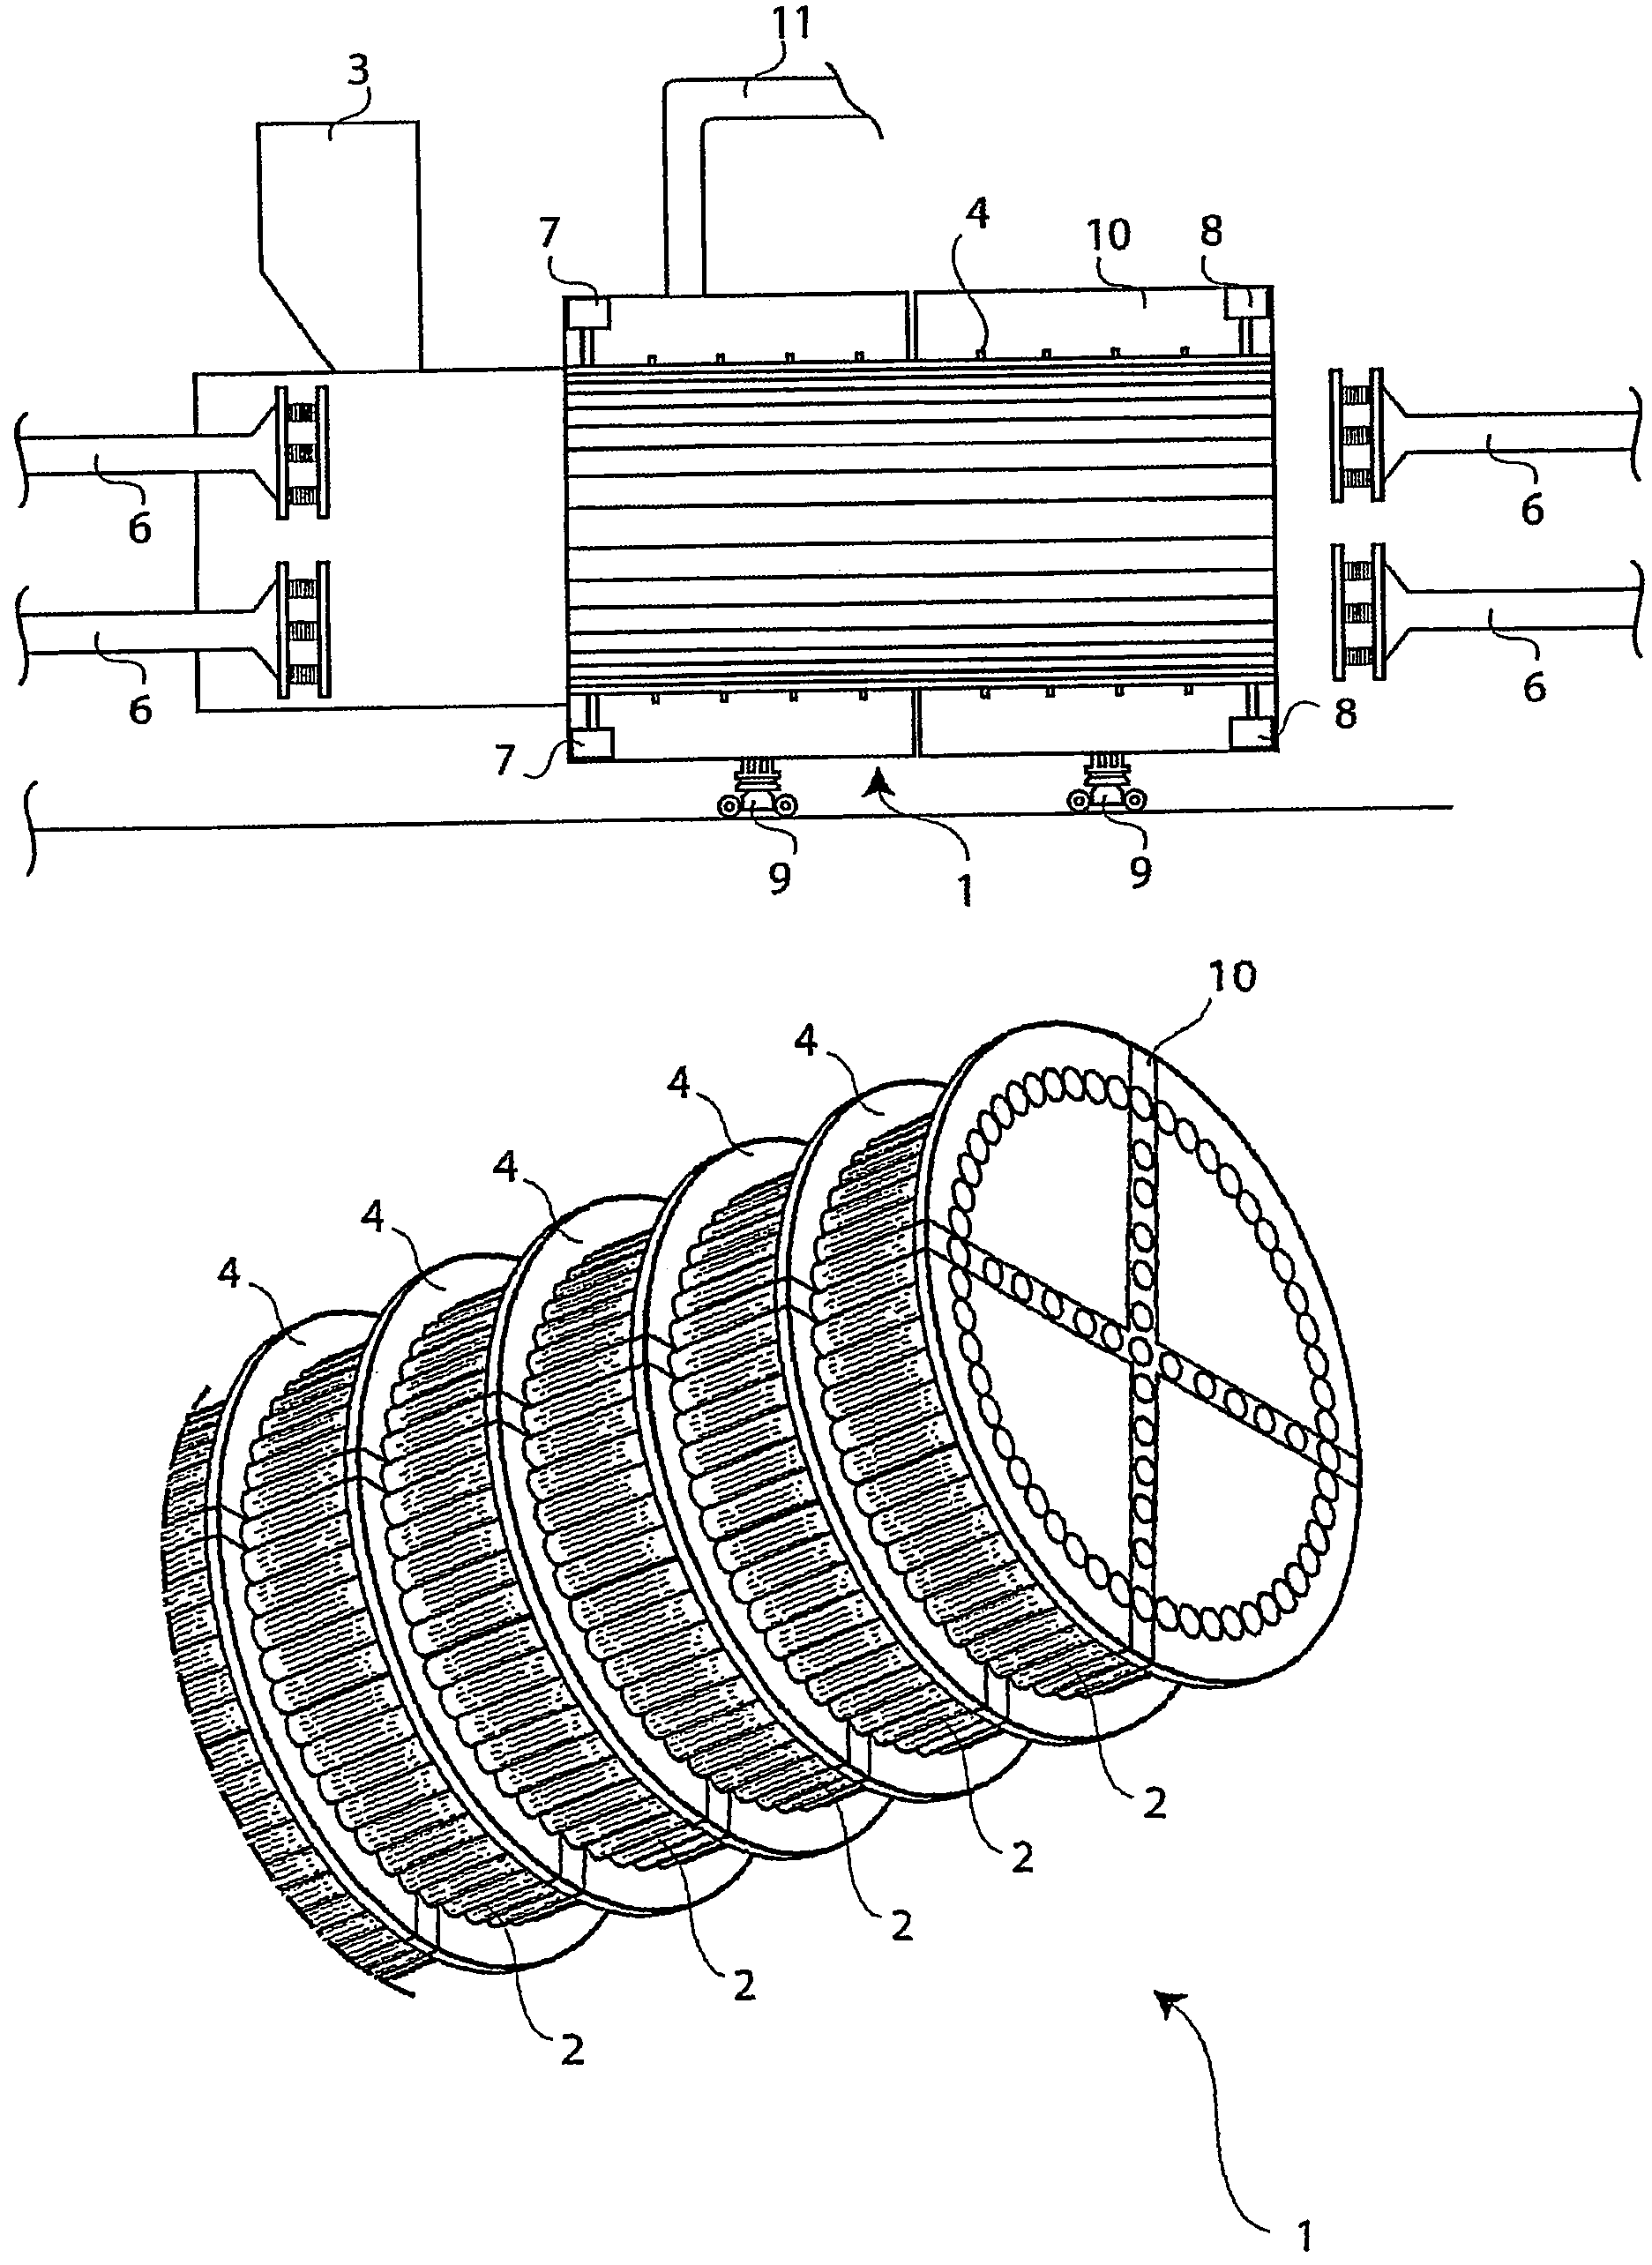 Double flow cage compactor dryer apparatus and method of compacting and drying wastes